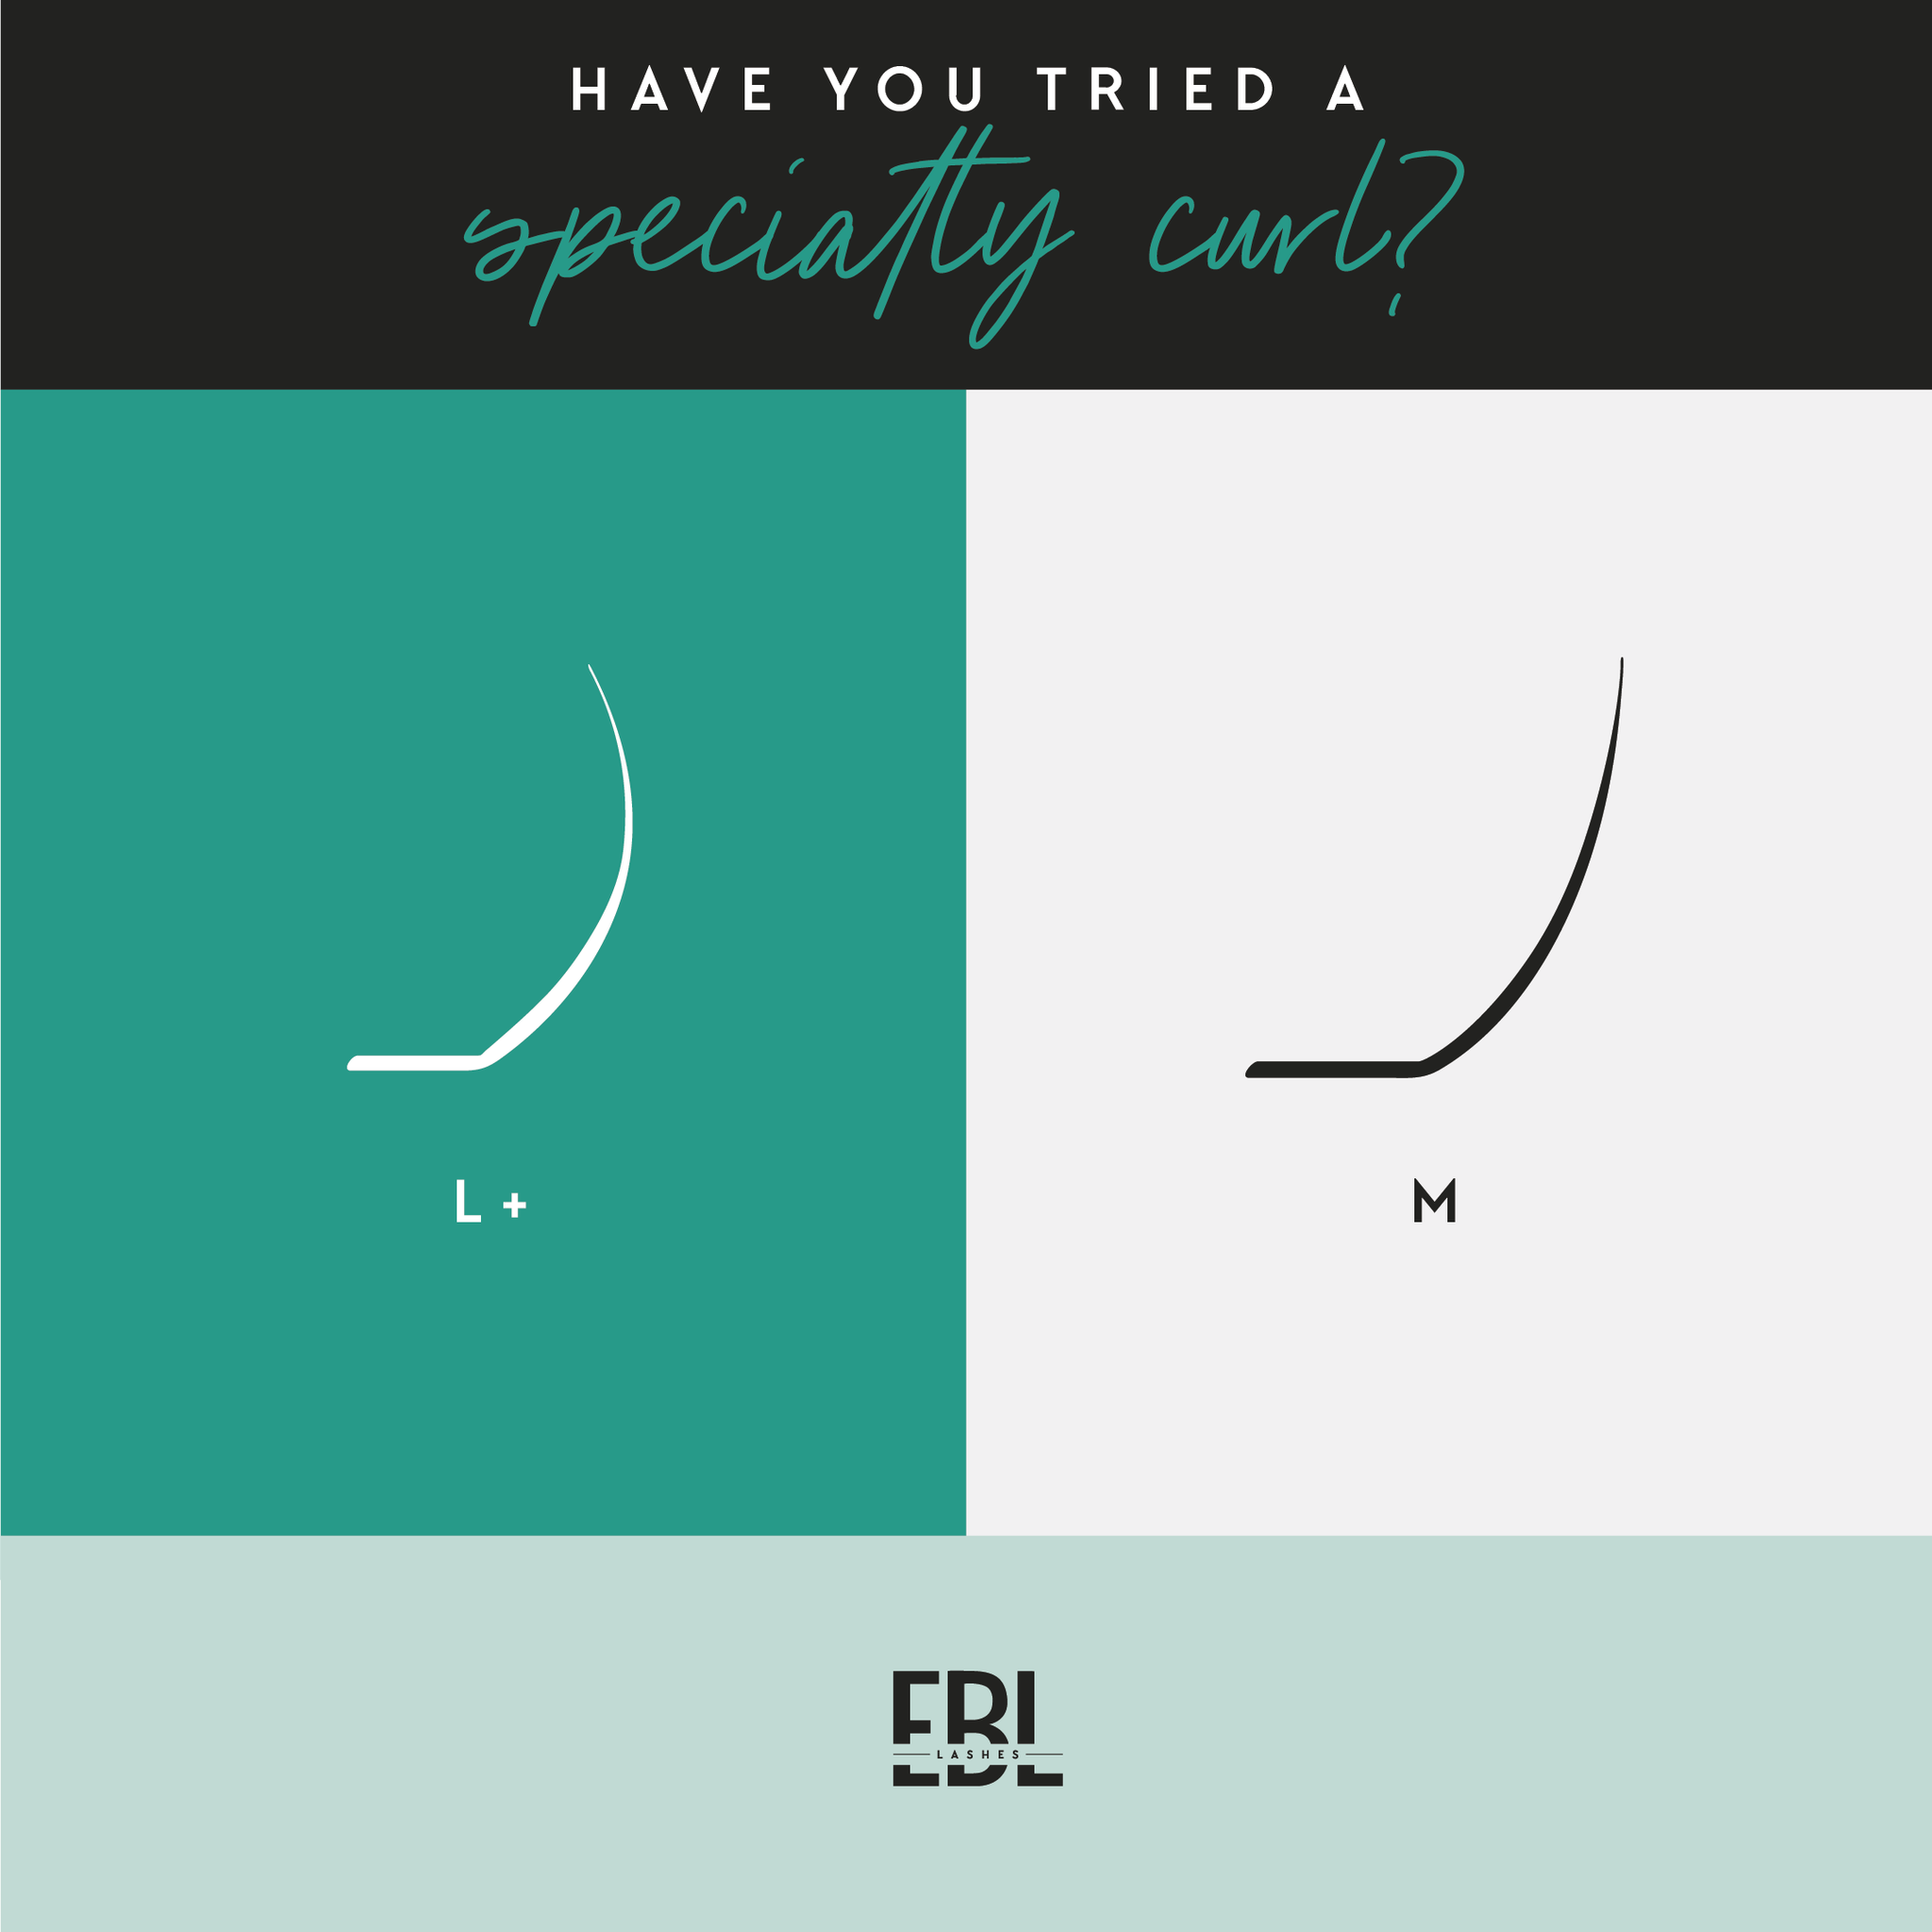 When to use L+ and M Specialty Eyelash Curl